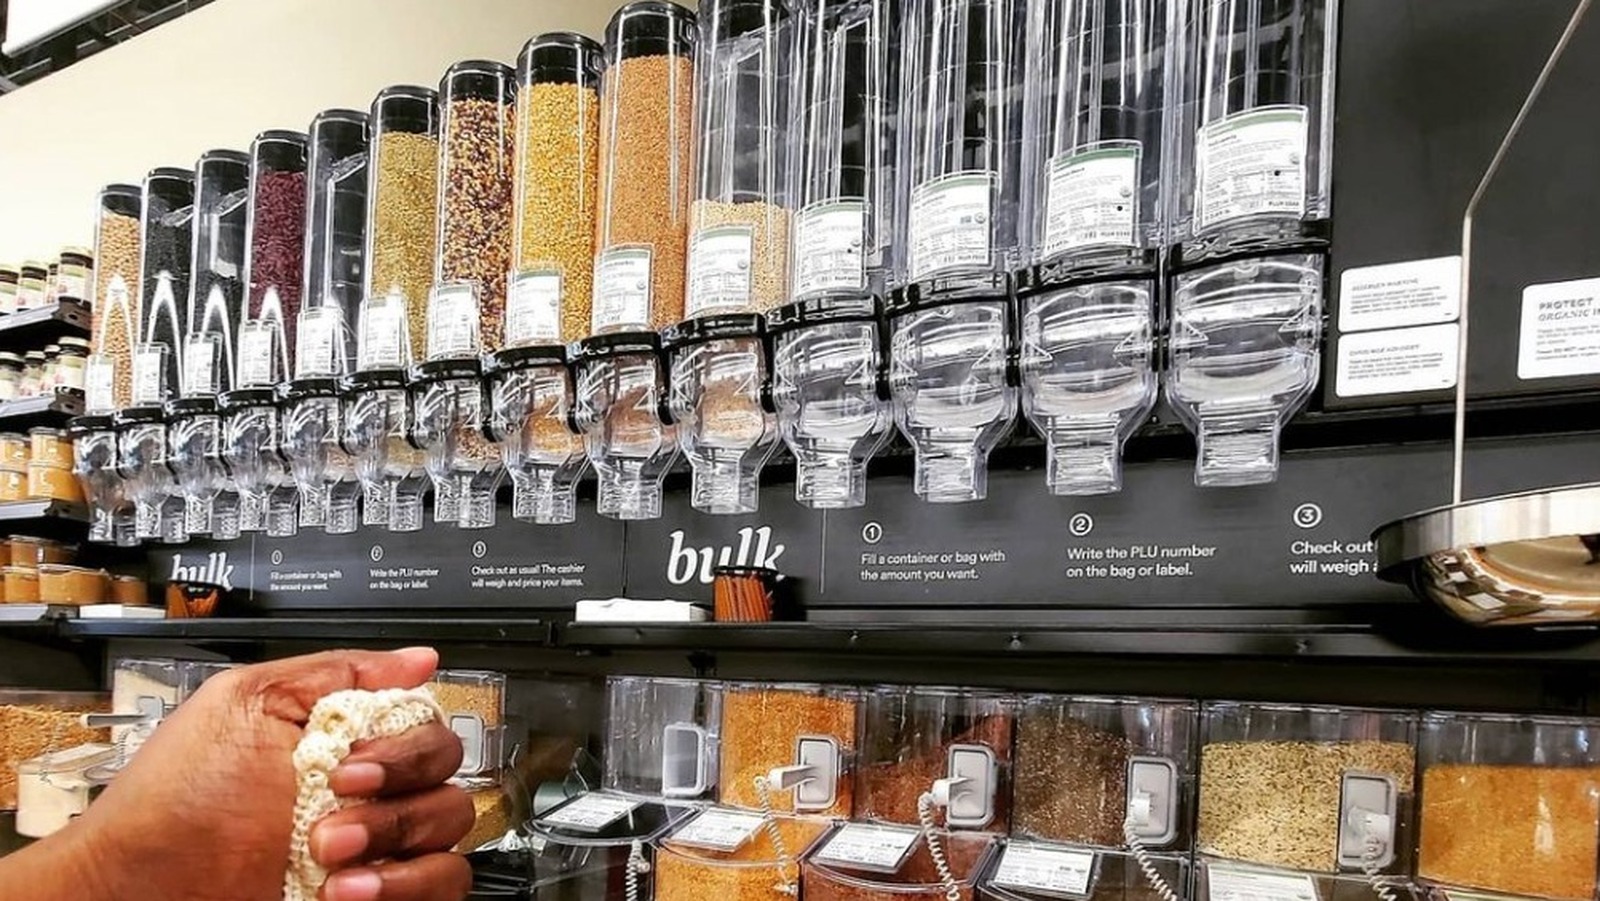 https://www.mashed.com/img/gallery/why-the-bulk-nuts-at-whole-foods-might-not-be-worth-it/l-intro-1660054839.jpg